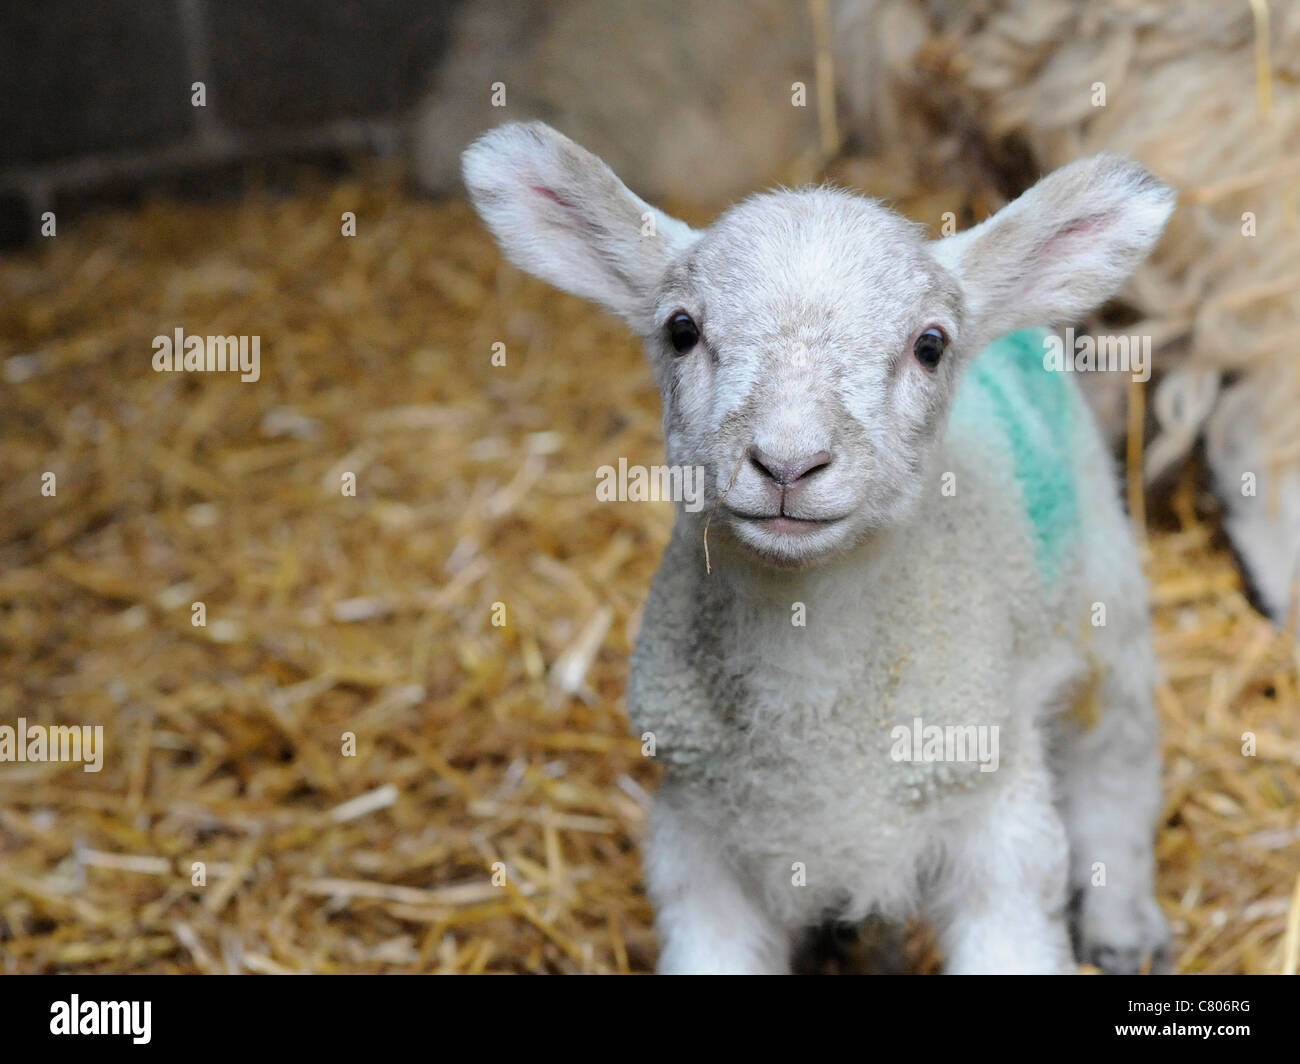 A very cute little baby lamb Stock Photo